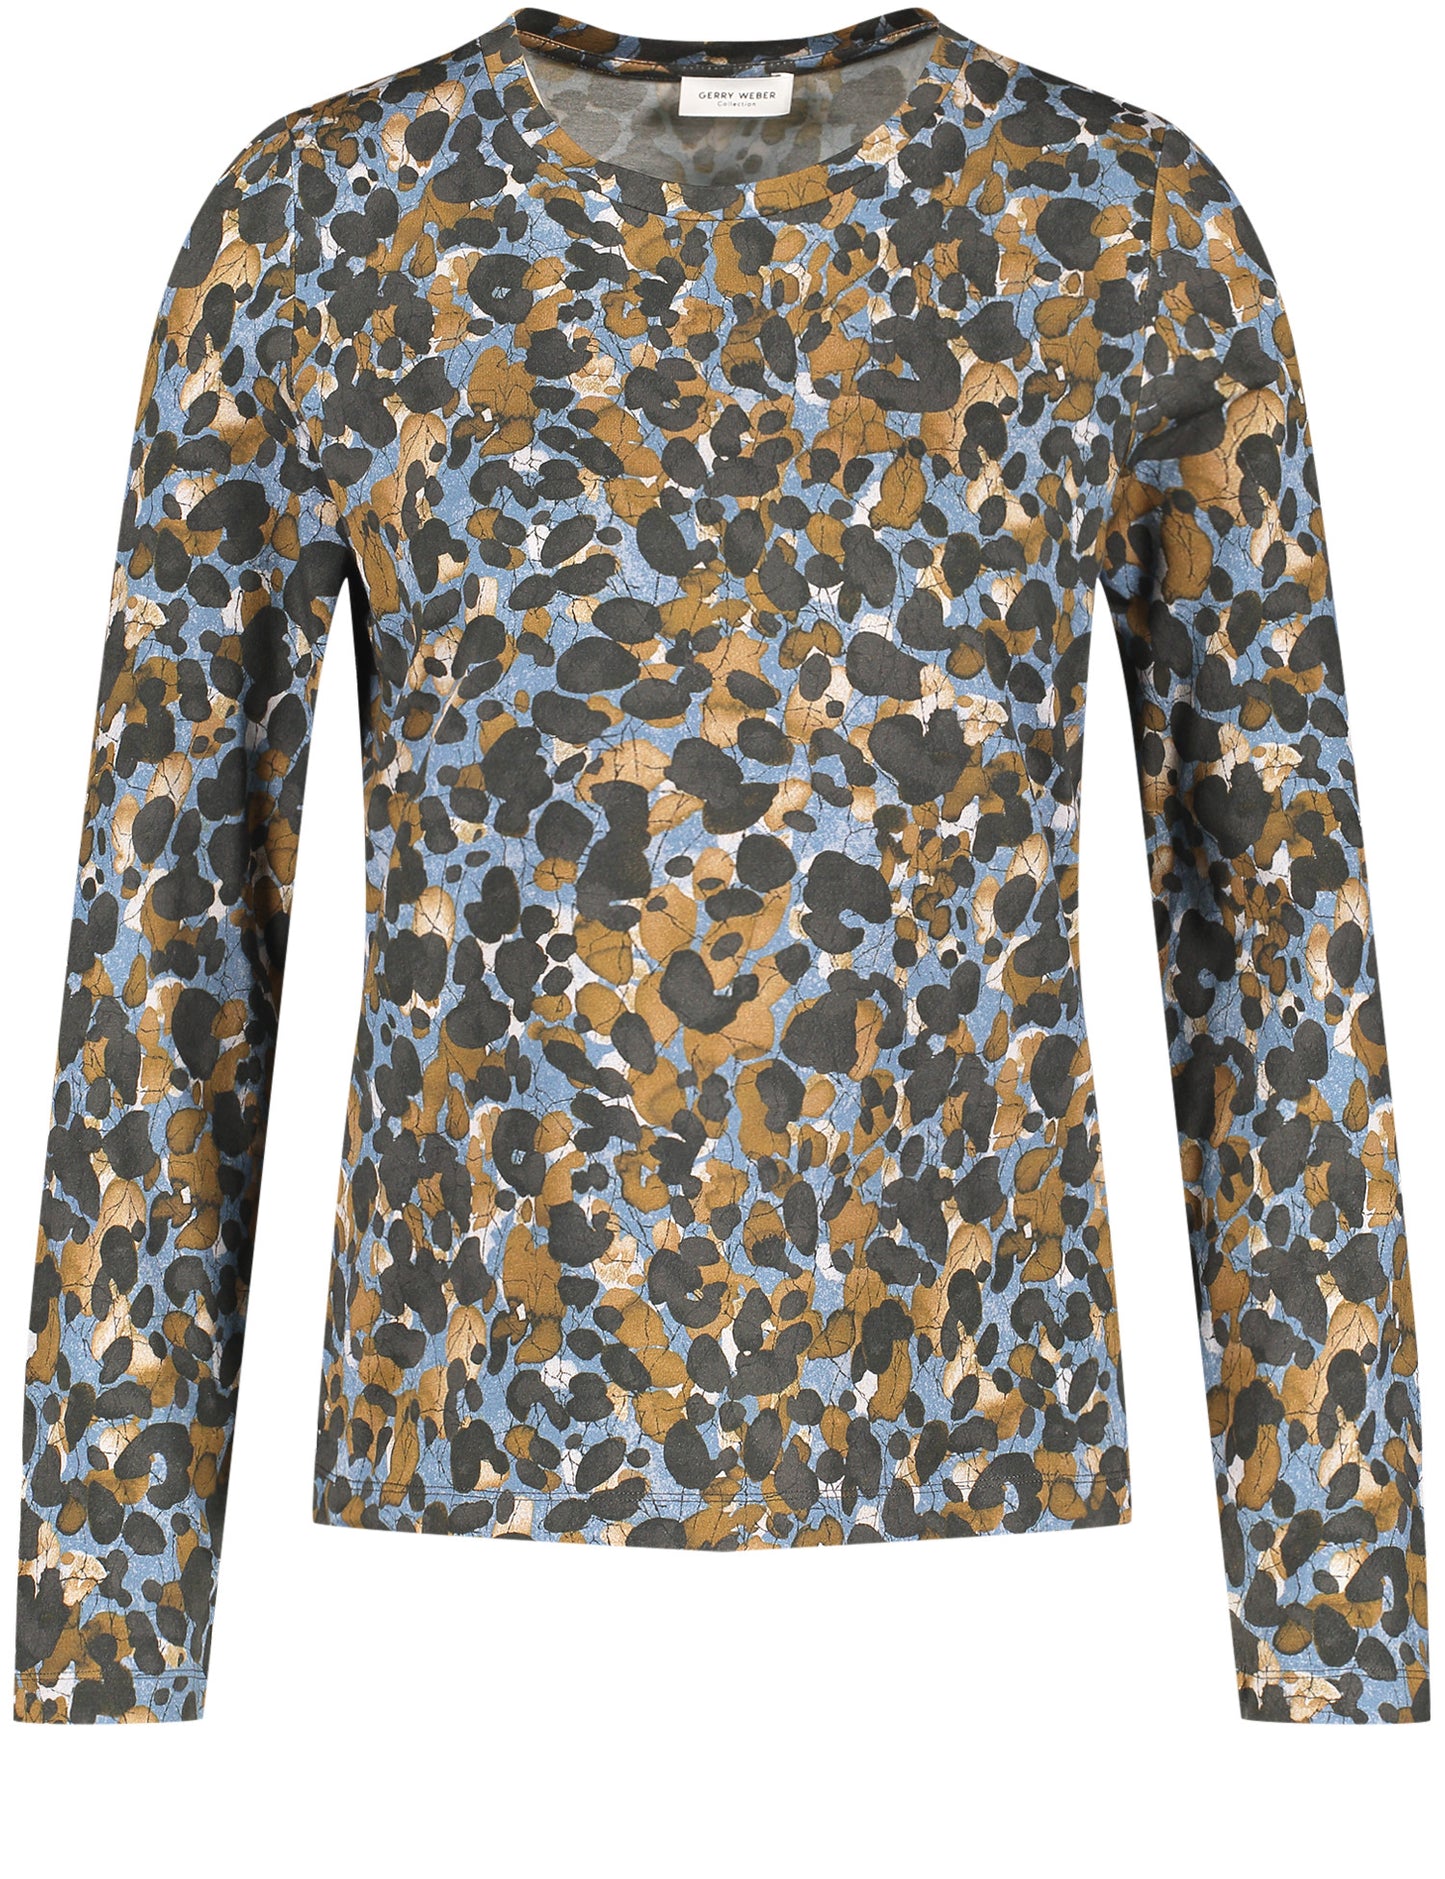 Long-sleeved shirt with all-over pattern